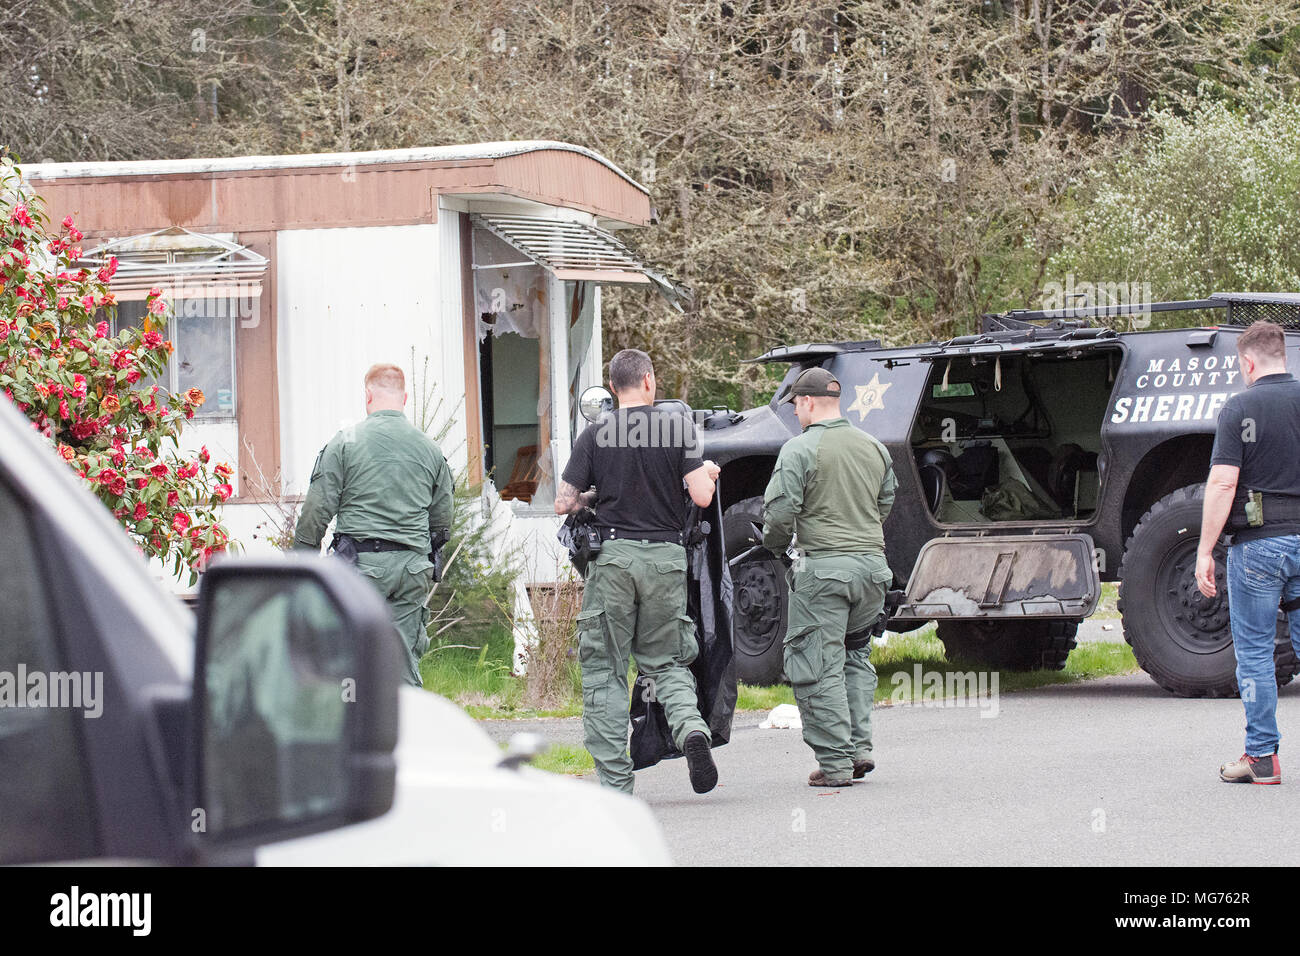 Shelton, Washington, USA, 27 April 2018.  Mason County Sheriff respond to the scene where a man stabbed a process server.  This was taken after the man was arrested and taken to the hospital witha dog bite wound.  It appears that police rammed the trailer with their SWAT vehicle.  Hidden Haven Mobile Home park scene of stand off today in Mason County. (Shawna Whelan) Credit: Shawna Whelan/Alamy Live News Stock Photo